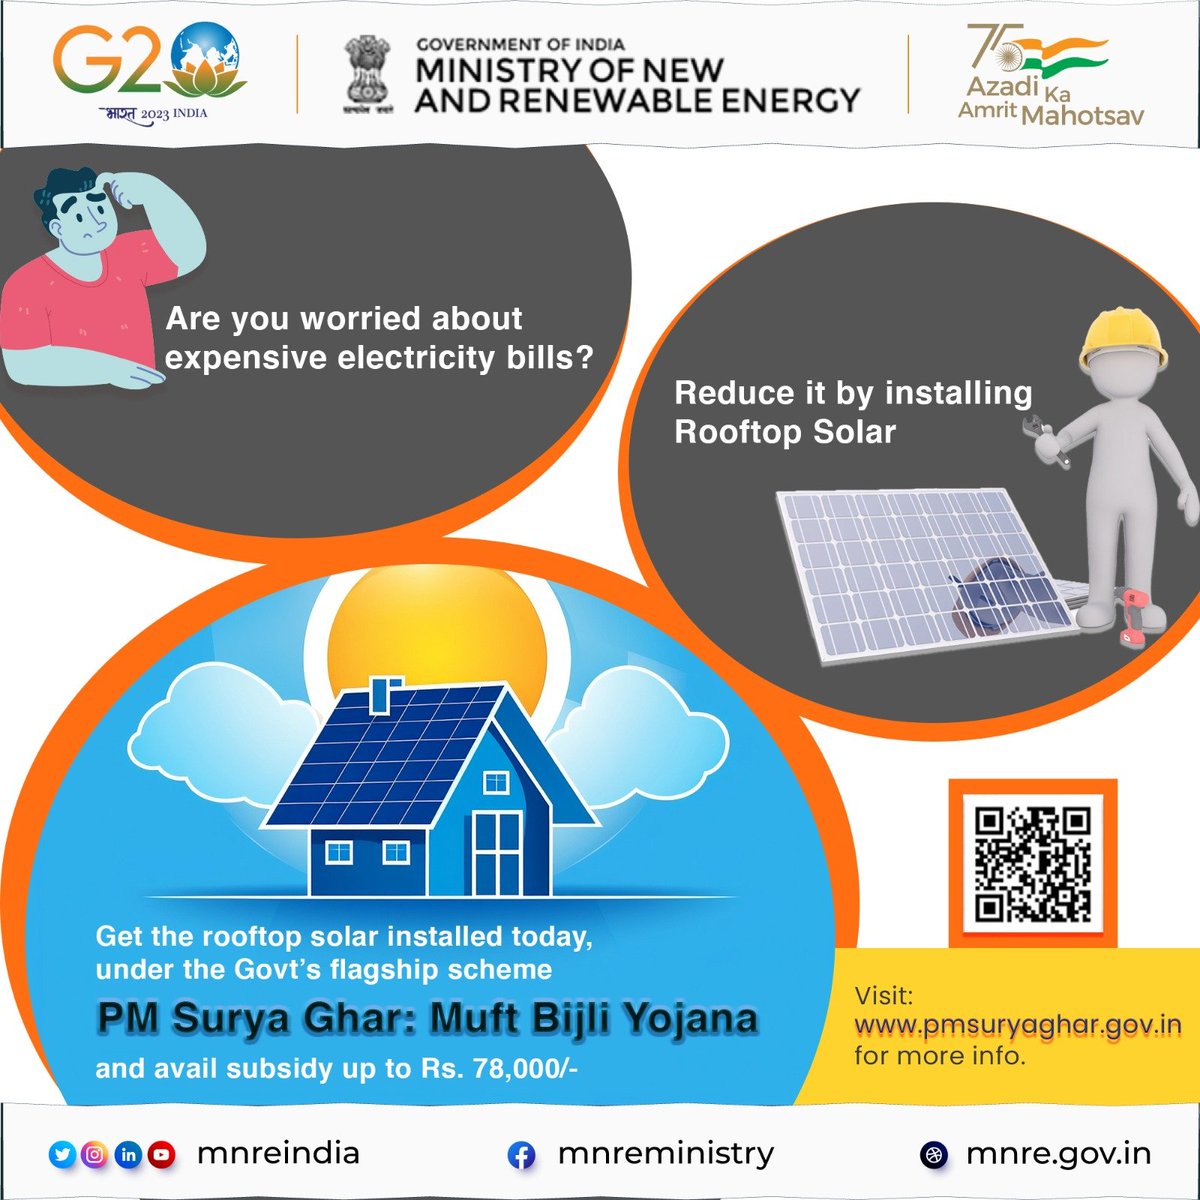 Get the Rooftop Solar installed today under the Govt's flagship scheme 'PM Surya Ghar' and avail subsidy up to Rs 78,000/-. 

Visit: pmsuryaghar.gov.in for more info

#RooftopSolar #SolarRooftop #MNREIndia #MNRE